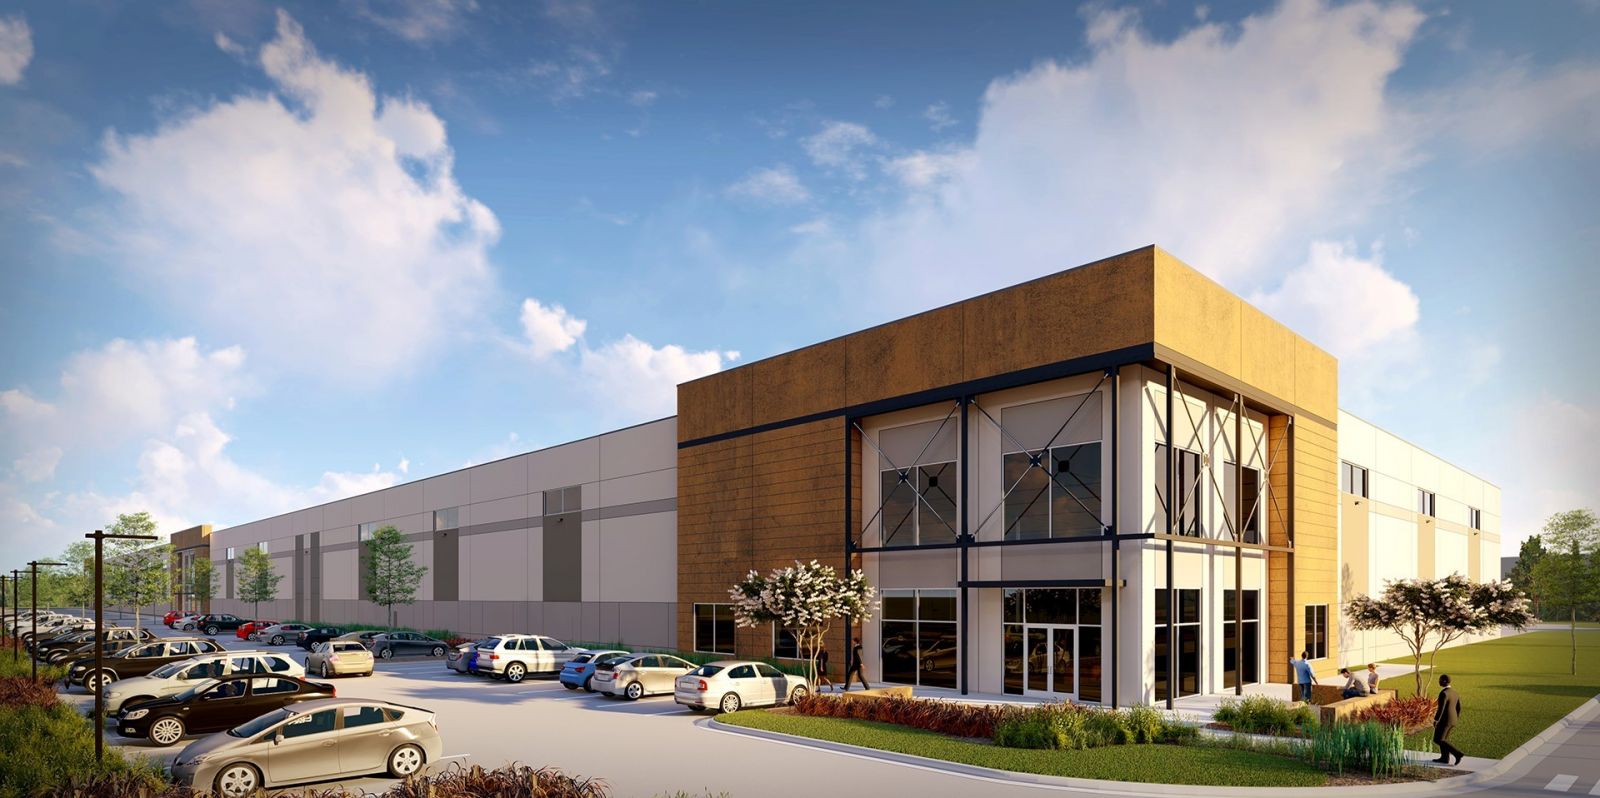 Construction on a speculative 206,410-square-foot industrial building with office space, trailer storage and full dock packages is expected to begin any day now and reach completion in spring 2021. (Photo/Provided)